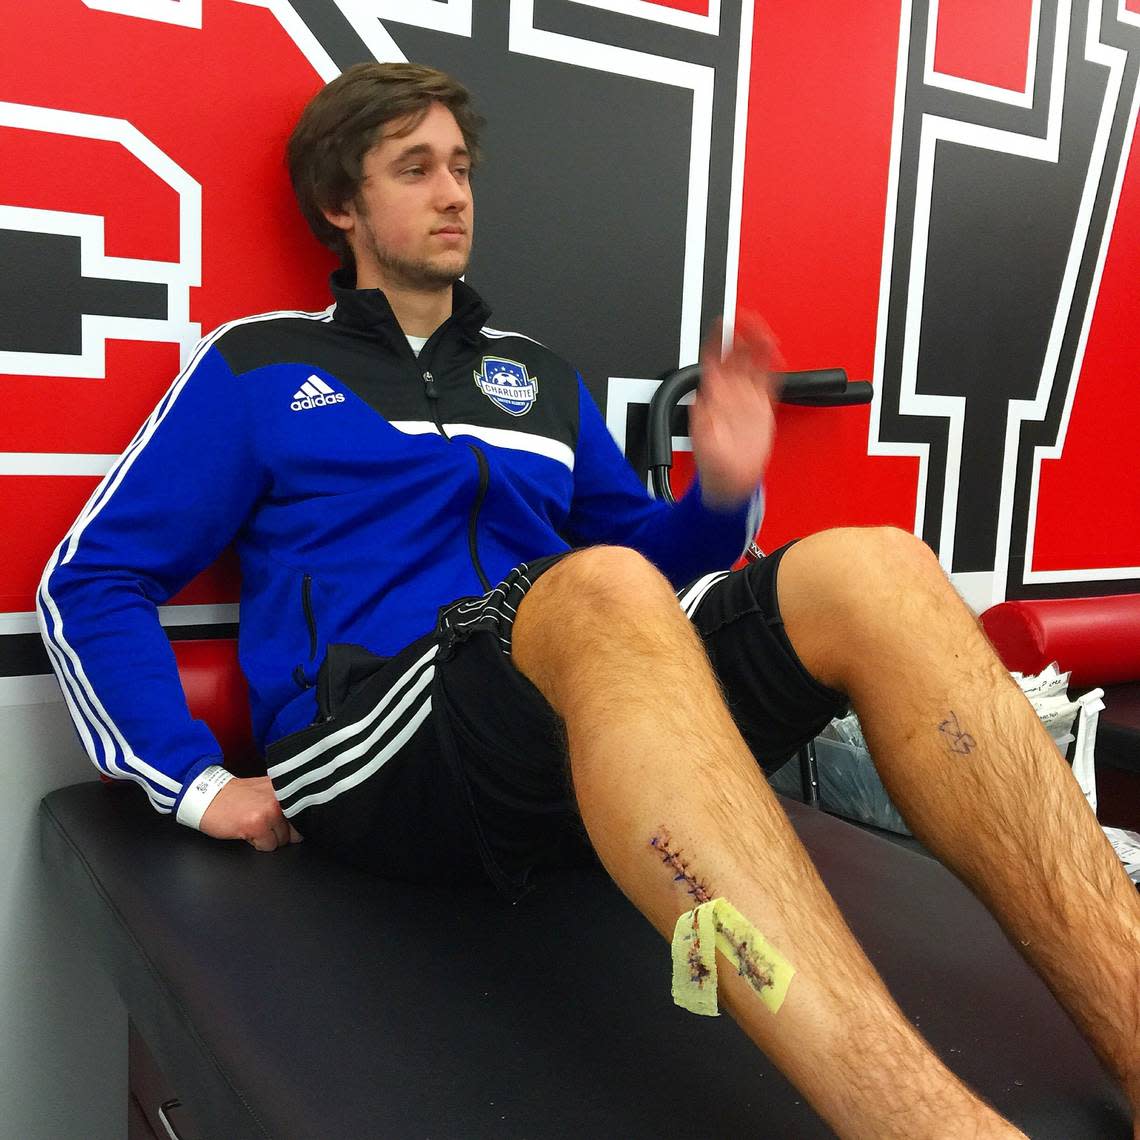 A March 29, 2015 photo shows Ben Locke, then a soccer player at N.C. State University, in a training room days after surgery for a leg injury.